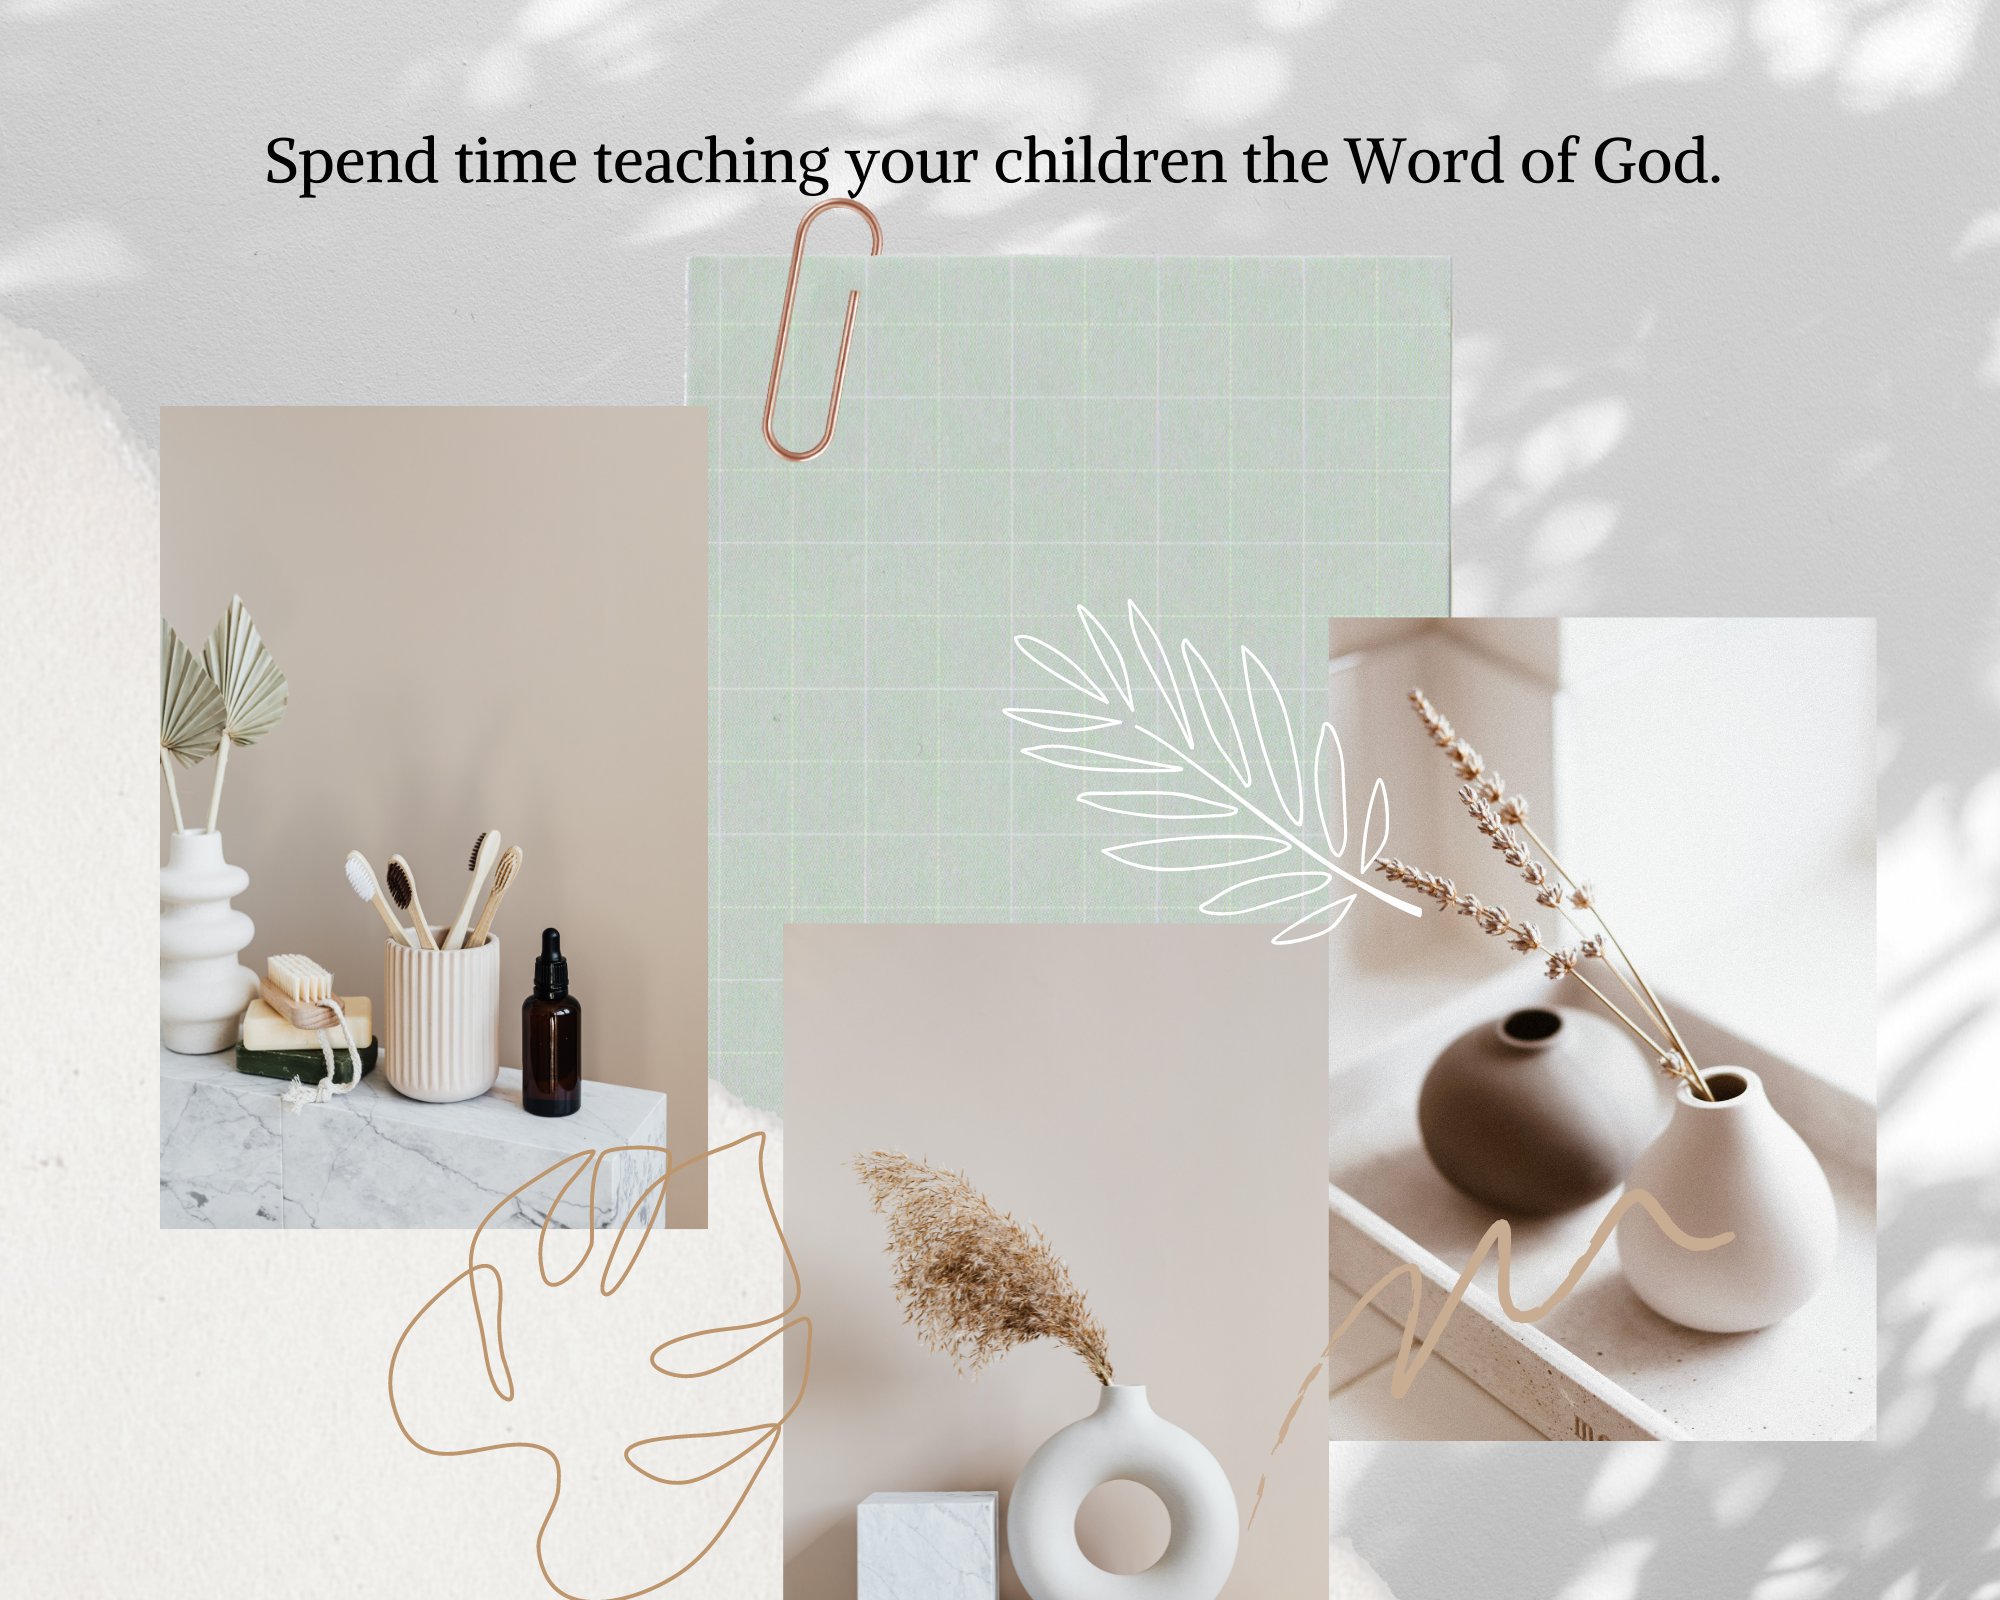 Spend time teaching your children the Word of God.